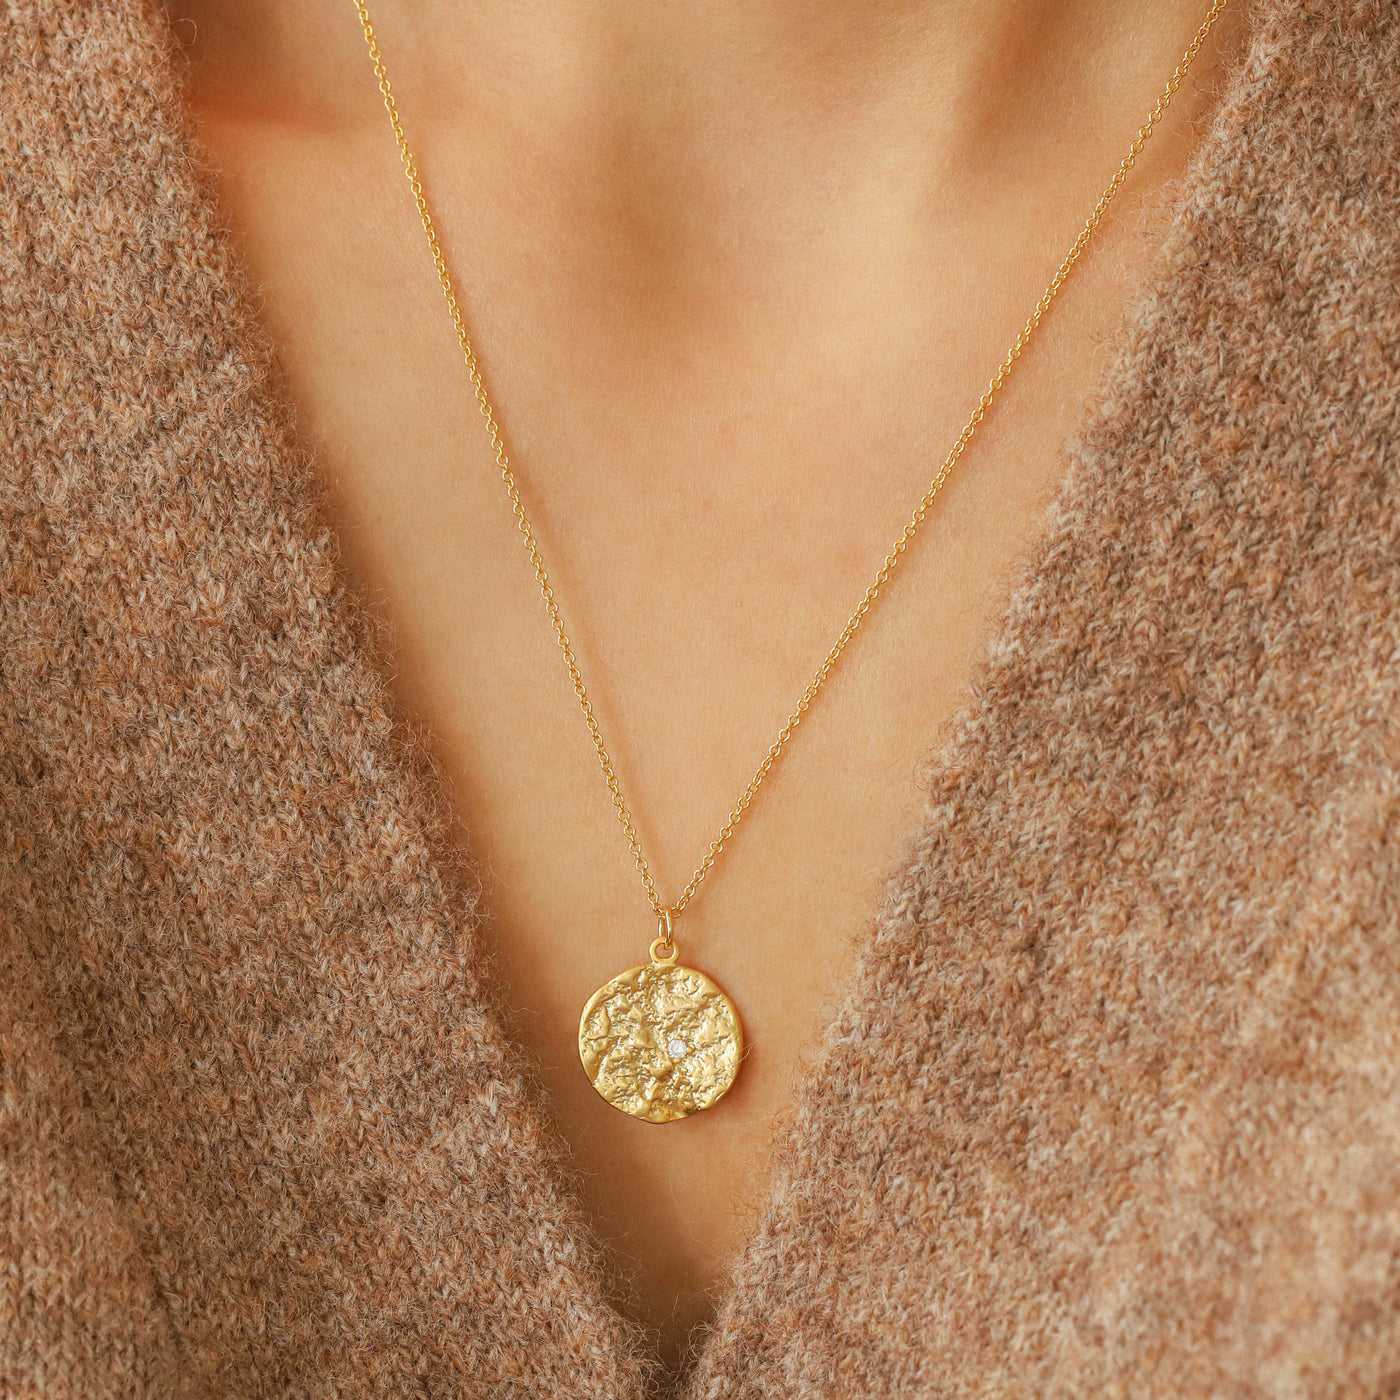 Gold coin necklace for everyday wear